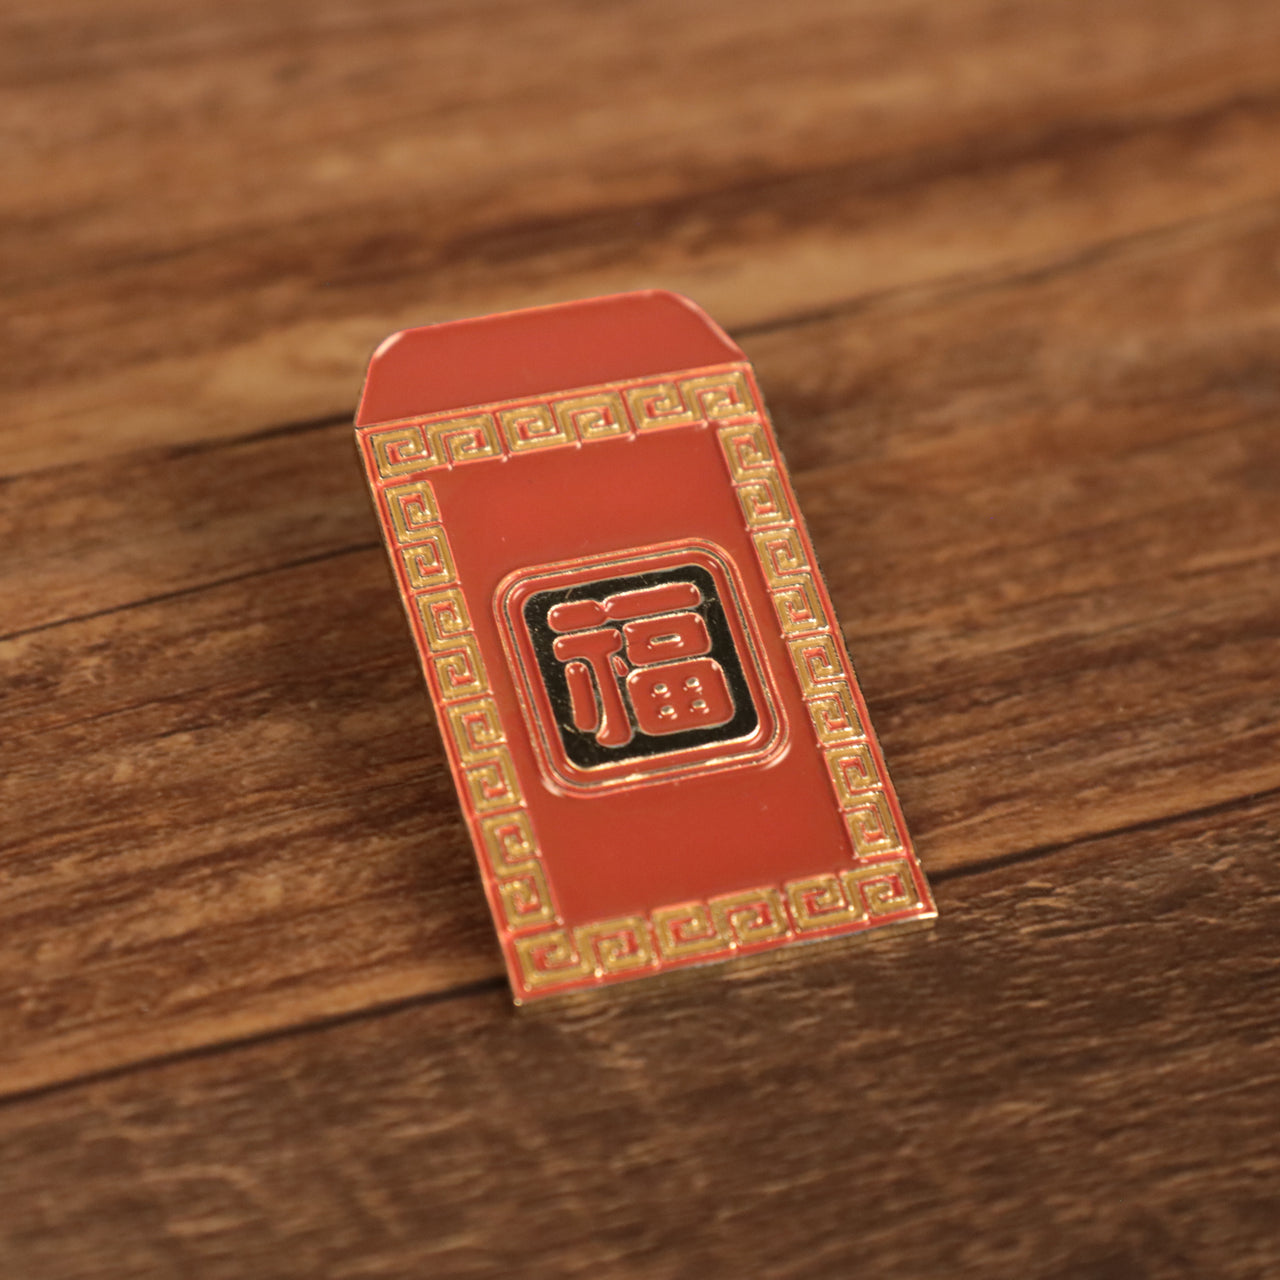 BROAD AND MARKET | CHINESE NEW YEAR RED ENVELOPE | PIN | OSFM